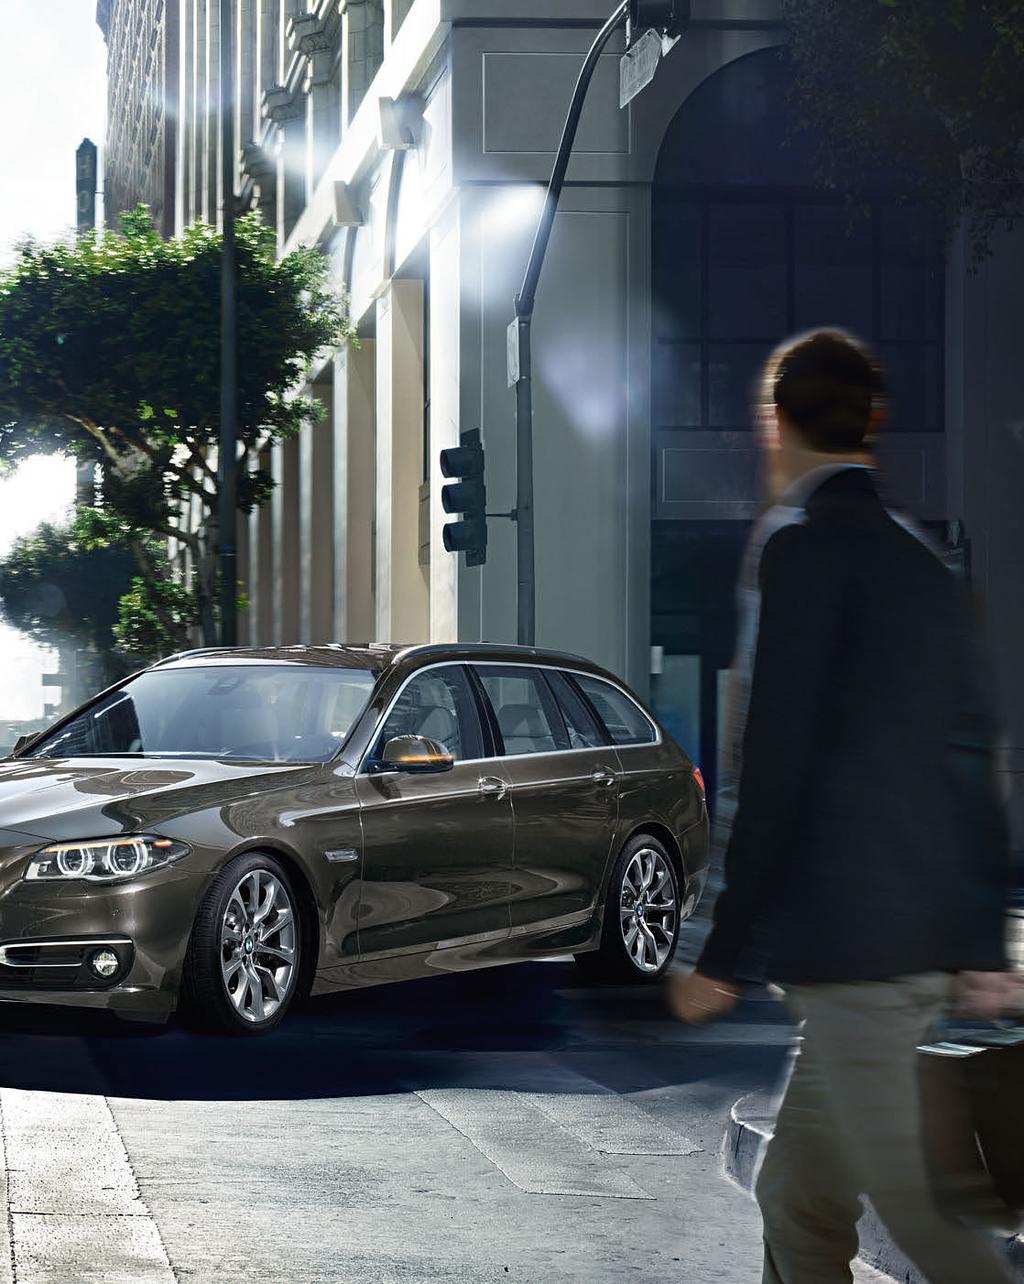 aesthetic of the BMW 5 Series Touring.